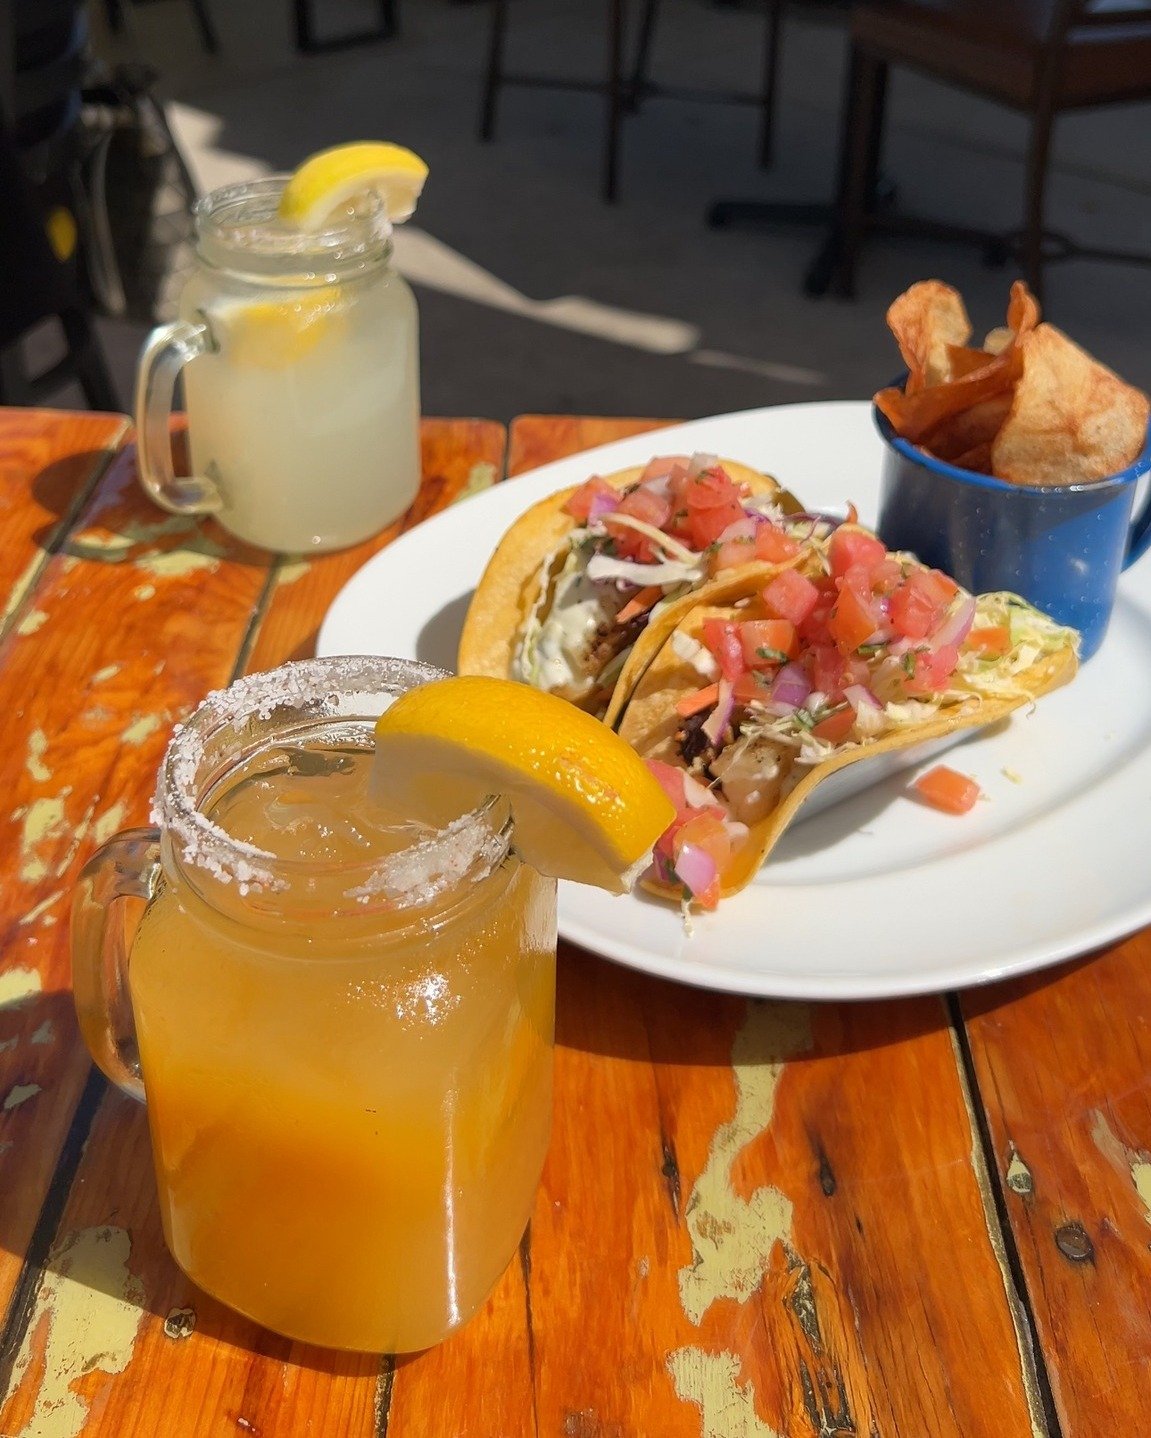 🌮✨Savoring every sip and sizzle with ice-cold drinks and our flavor-packed tacos. It's the perfect combo for a refreshing break!
&hellip;
#dinegps #visitpalmdesert #cupscafe #foodcontent